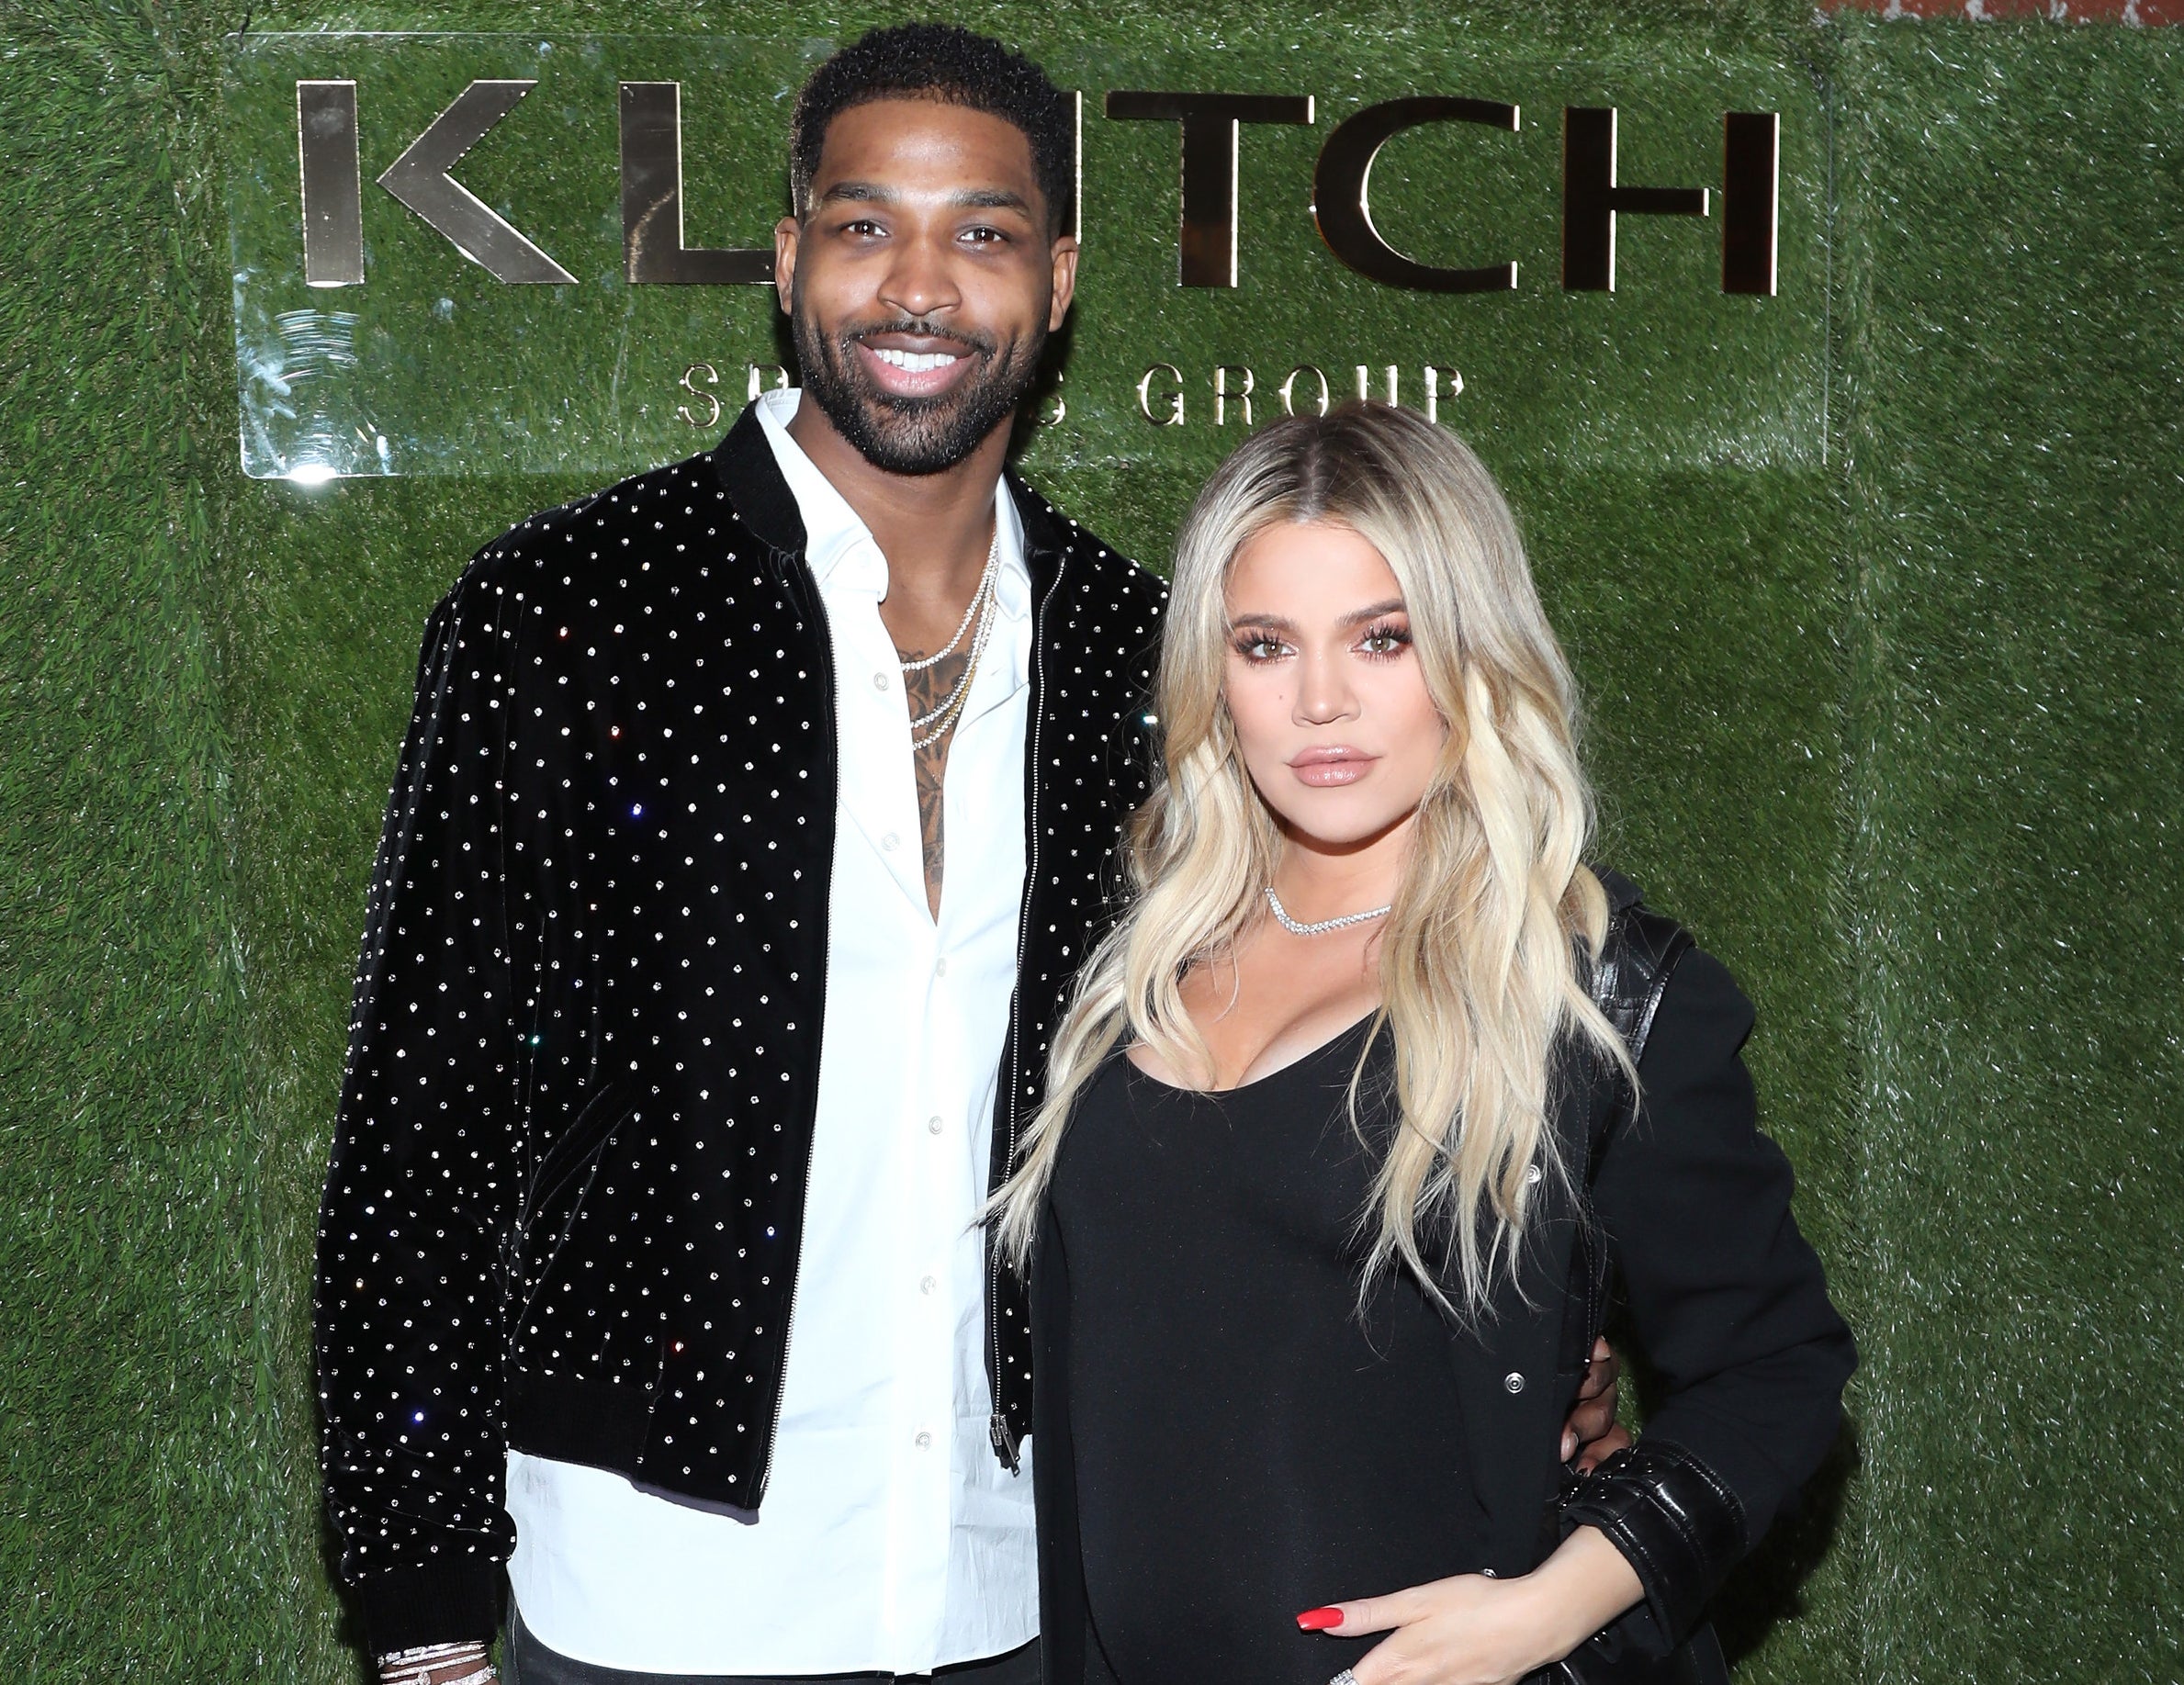 Tristan and Khloe pose together at an event